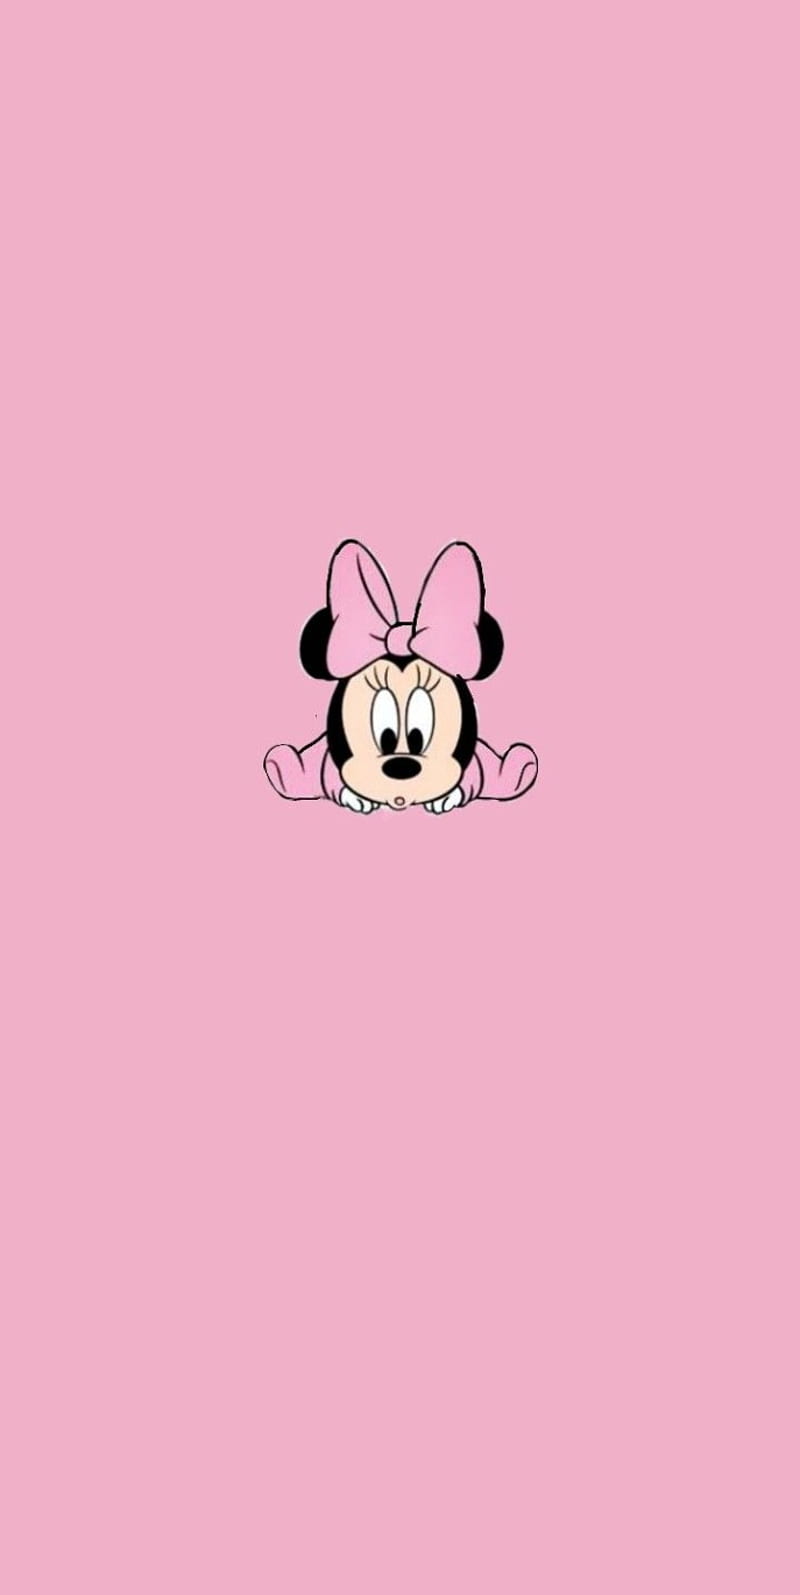 Mickey Mouse Disney Aesthetic : Baby Minnie, iPhone, Color Schemes, Aesthetic Cartoon Disney, HD phone wallpaper